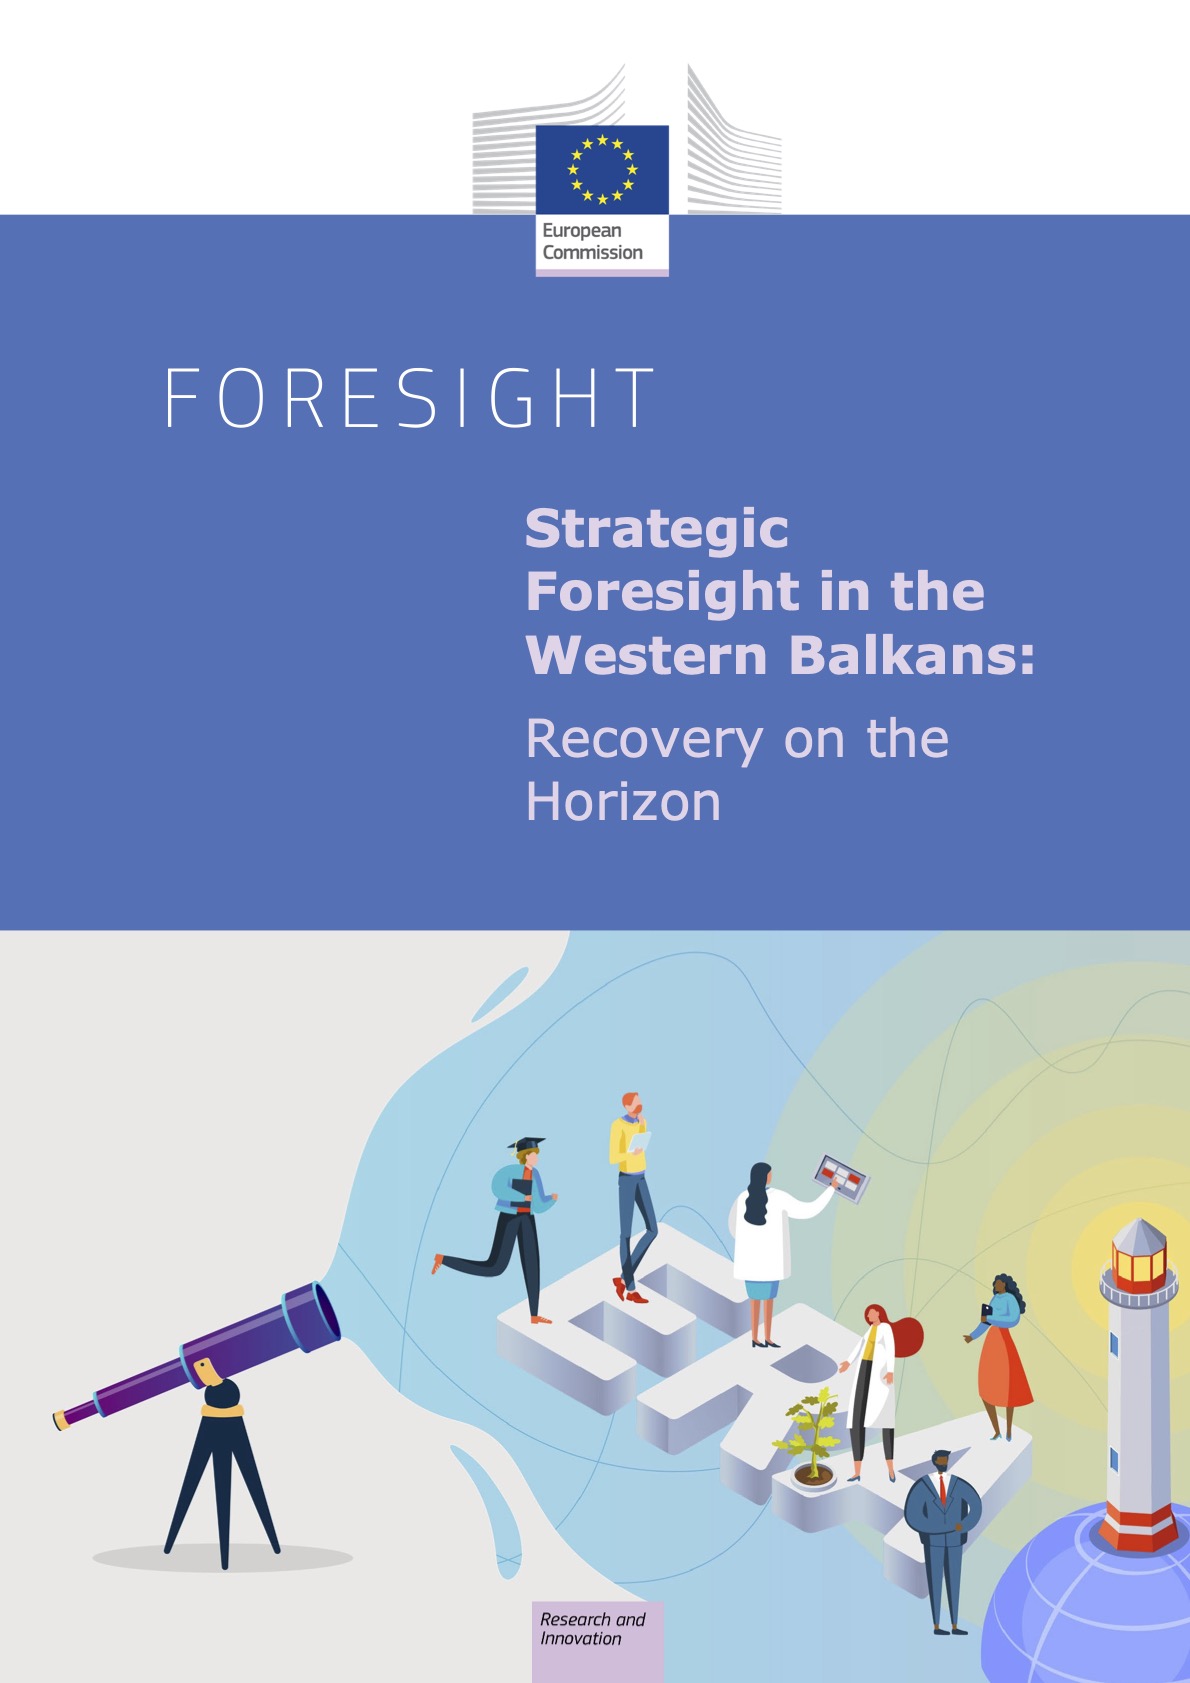 Strategic foresight in the Western Balkans: Recovery on the Horizon